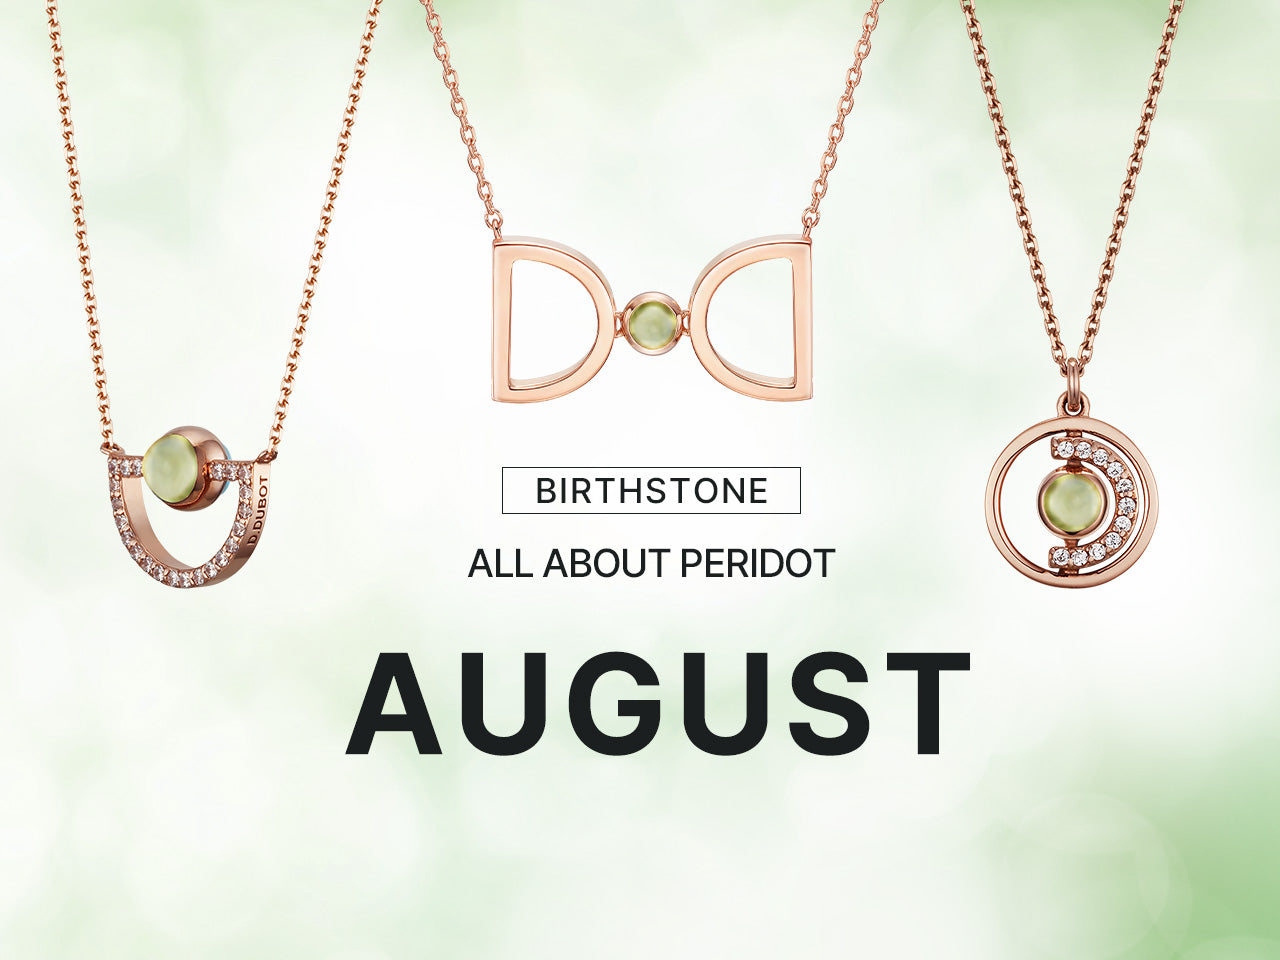 August Birthstone: All About Peridot